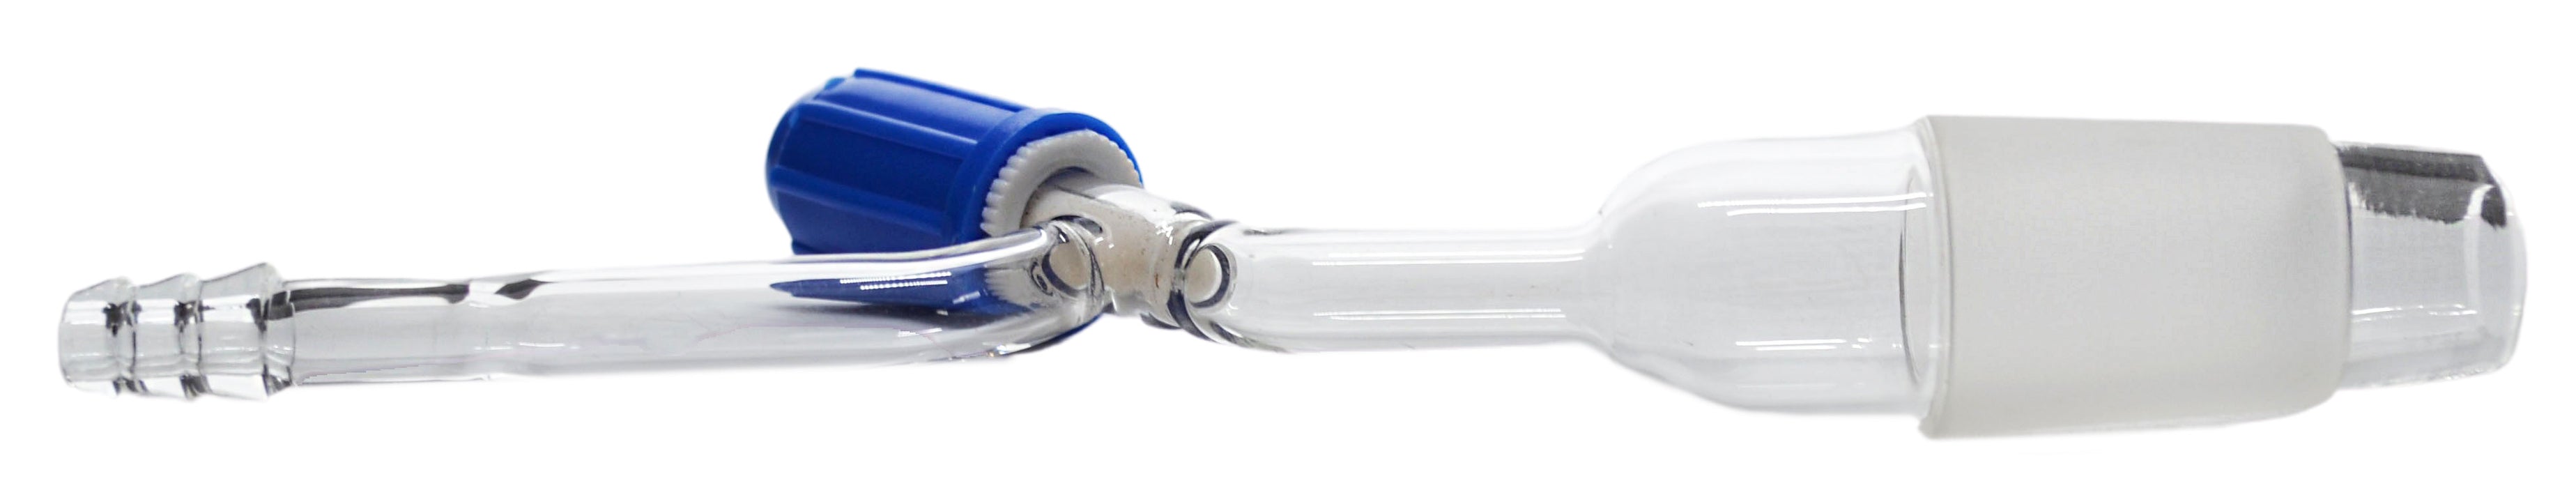 Stopcock Adapter - Rotaflow Key, 24/29 Cone Size - Straight Connection with Cone for Flexible Tubing - Borosilicate 3.3 Glass - Eisco Labs